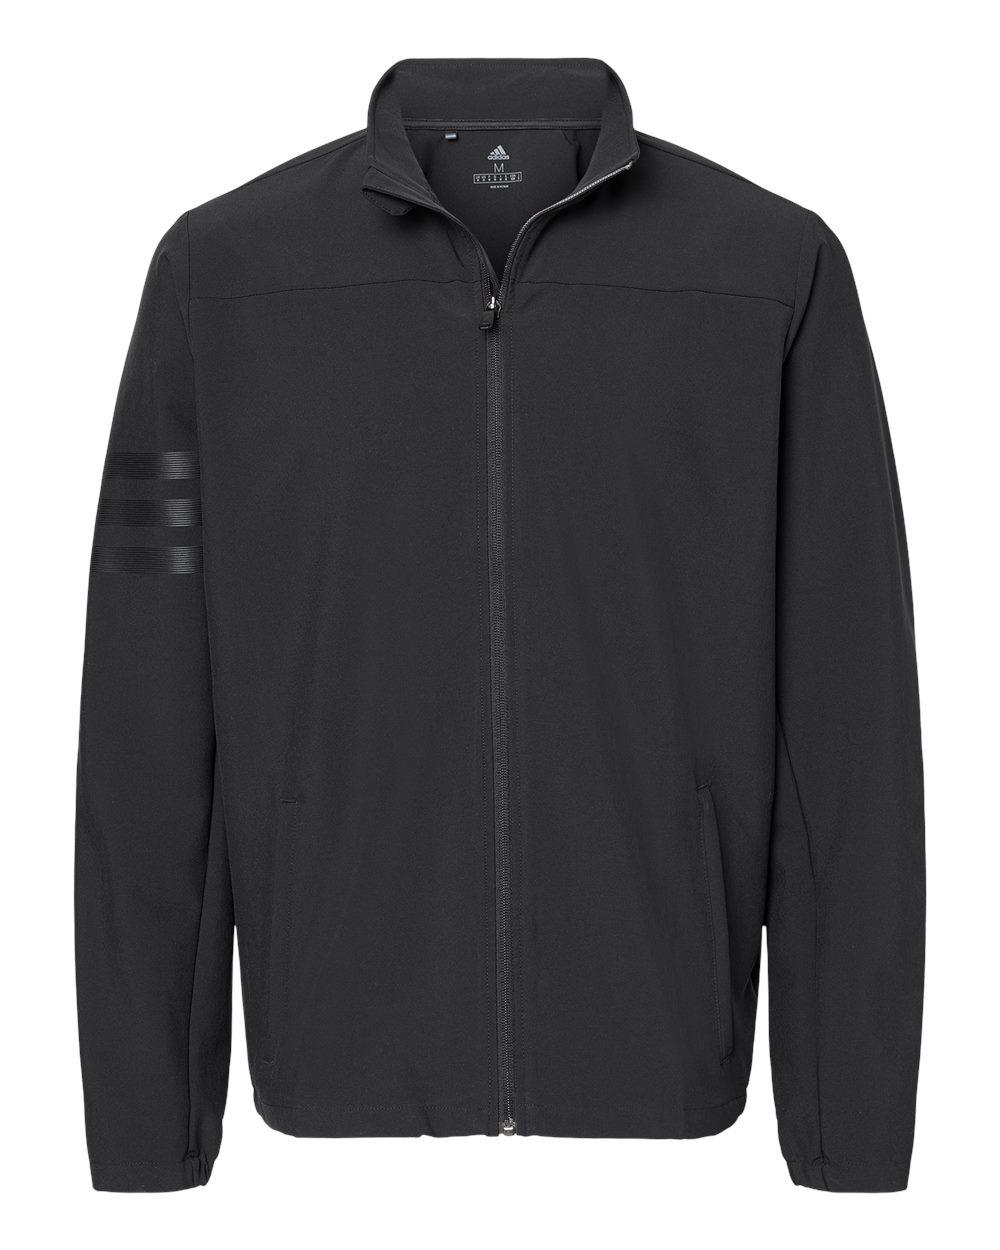 Picture of Adidas 3-Stripes Full-Zip Jacket